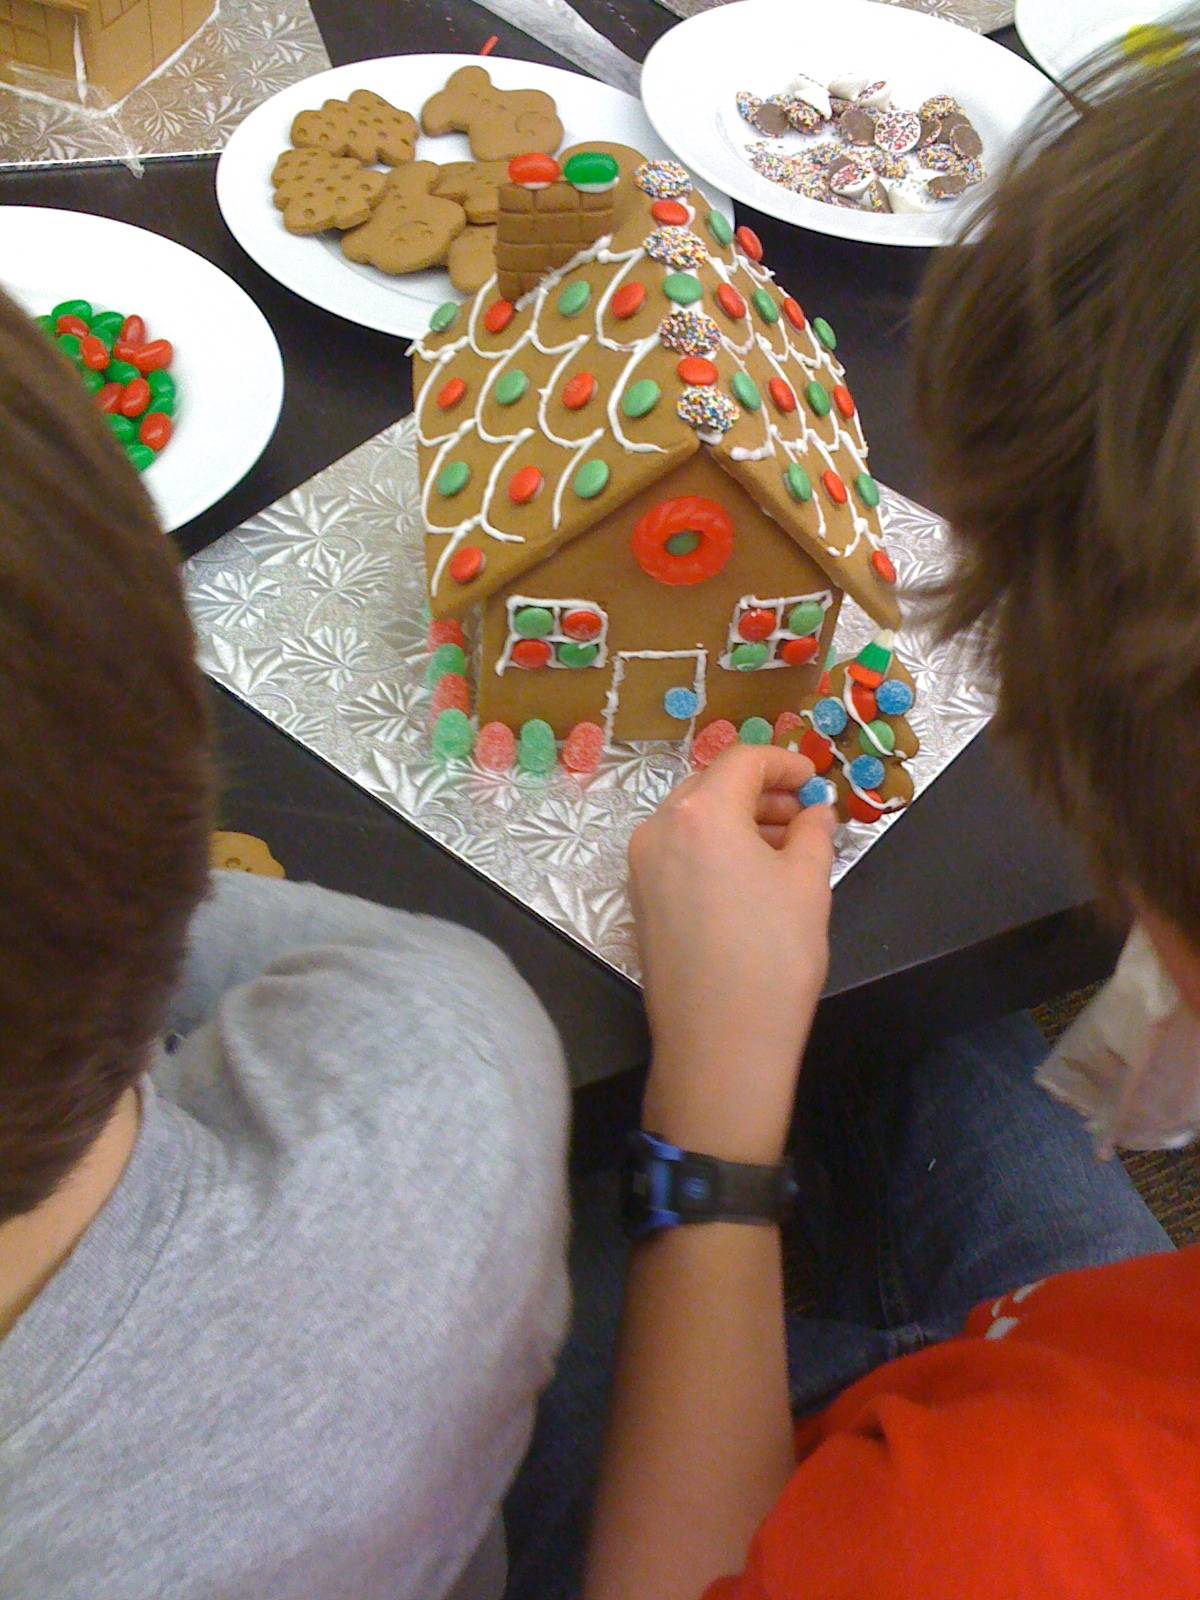 Constructing a gingerbread house